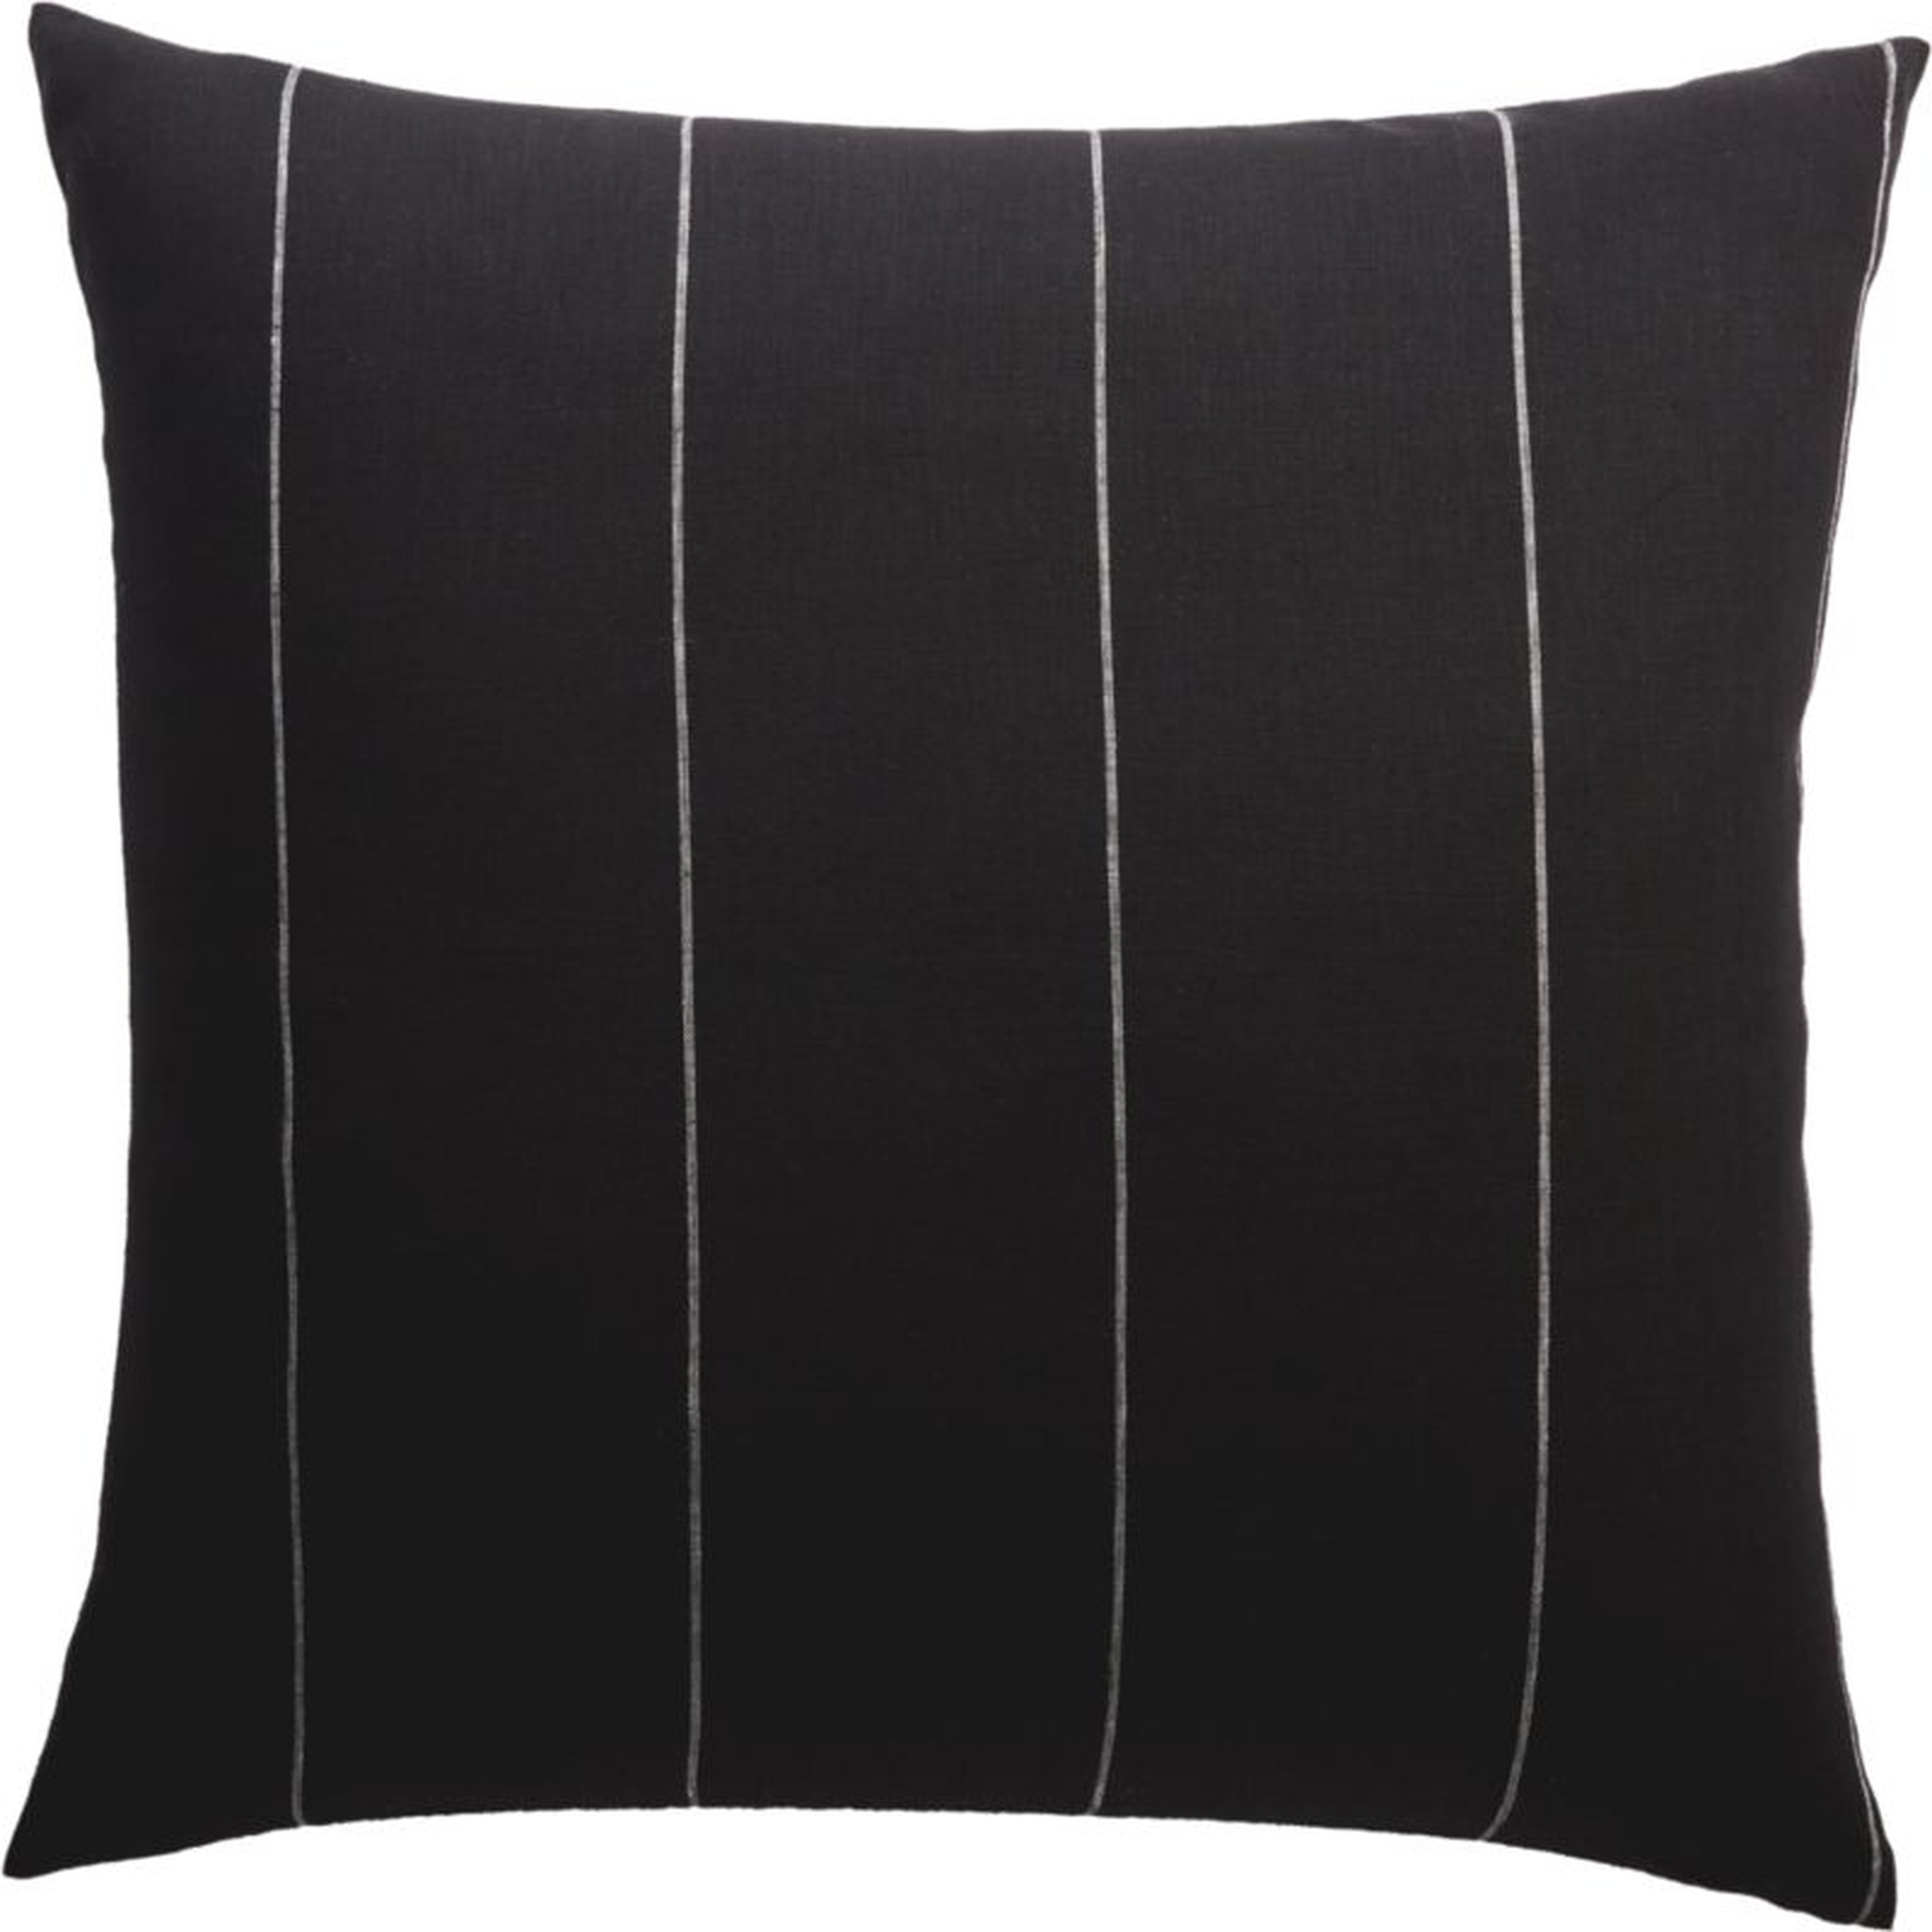 Pinstripe Linen Pillow with Feather-Down Insert, Black, 20" x 20" - CB2